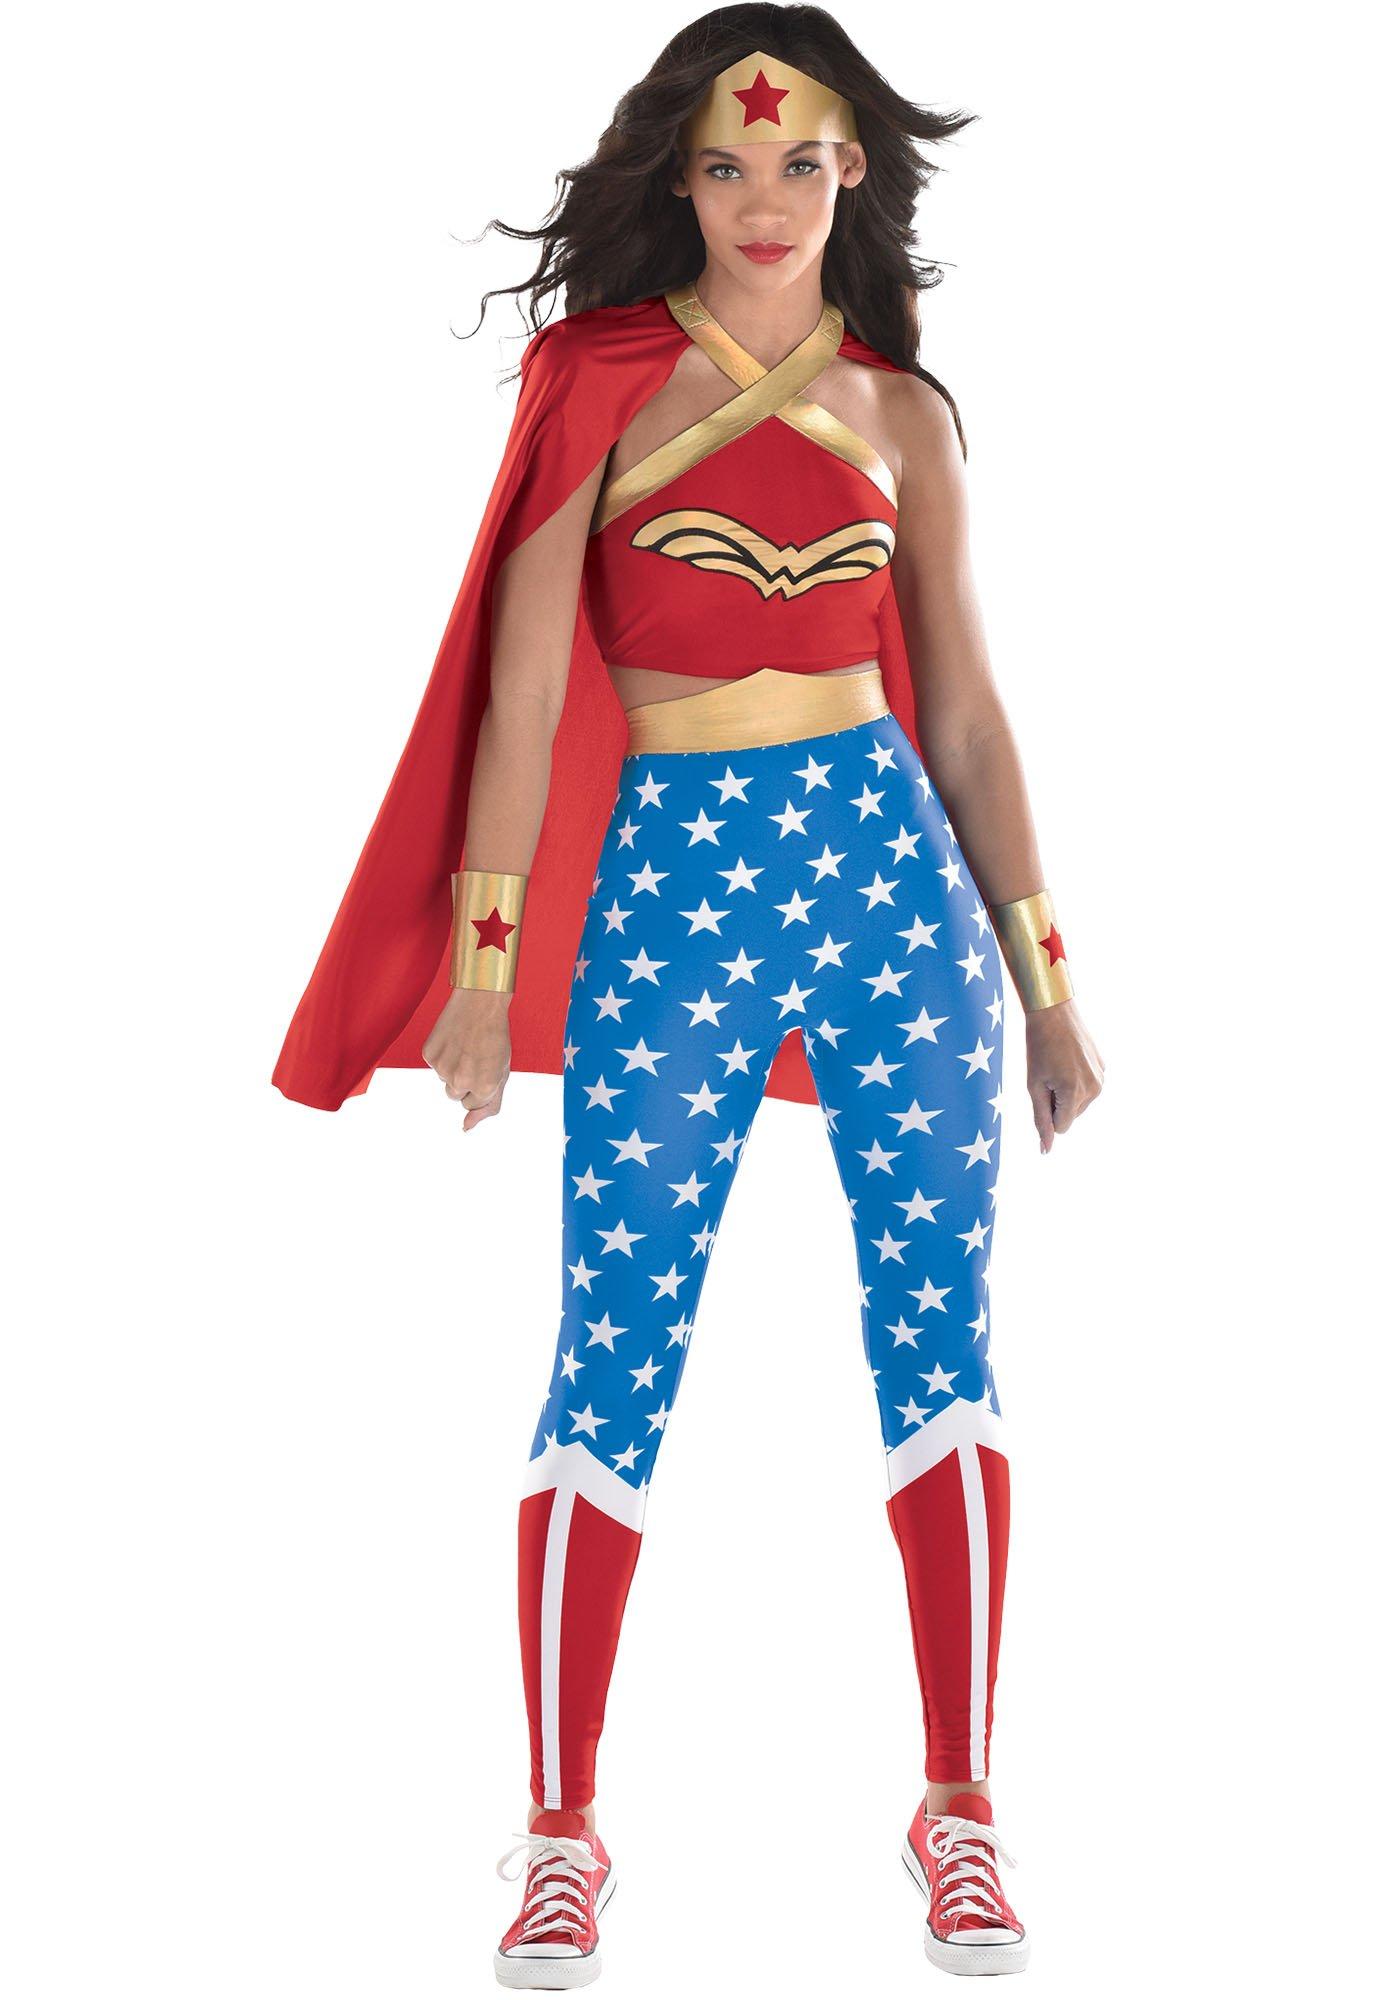 Adult Wonder Woman Costume Halloween Cosplay Party Fancy Dress Outfit